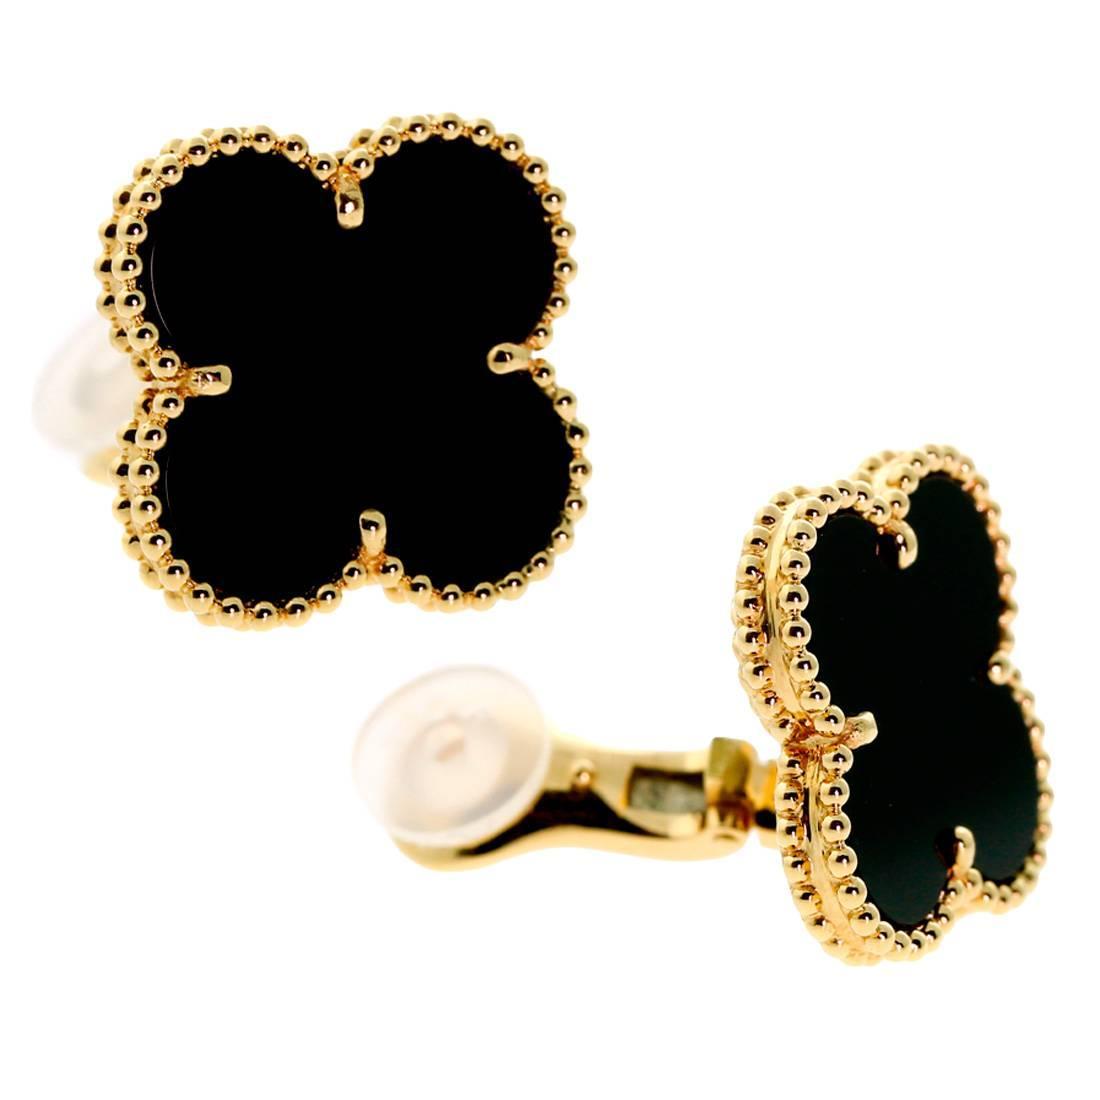 Van Cleef and Arpels Magic Alhambra Onyx Gold Earrings For Sale at 1stdibs